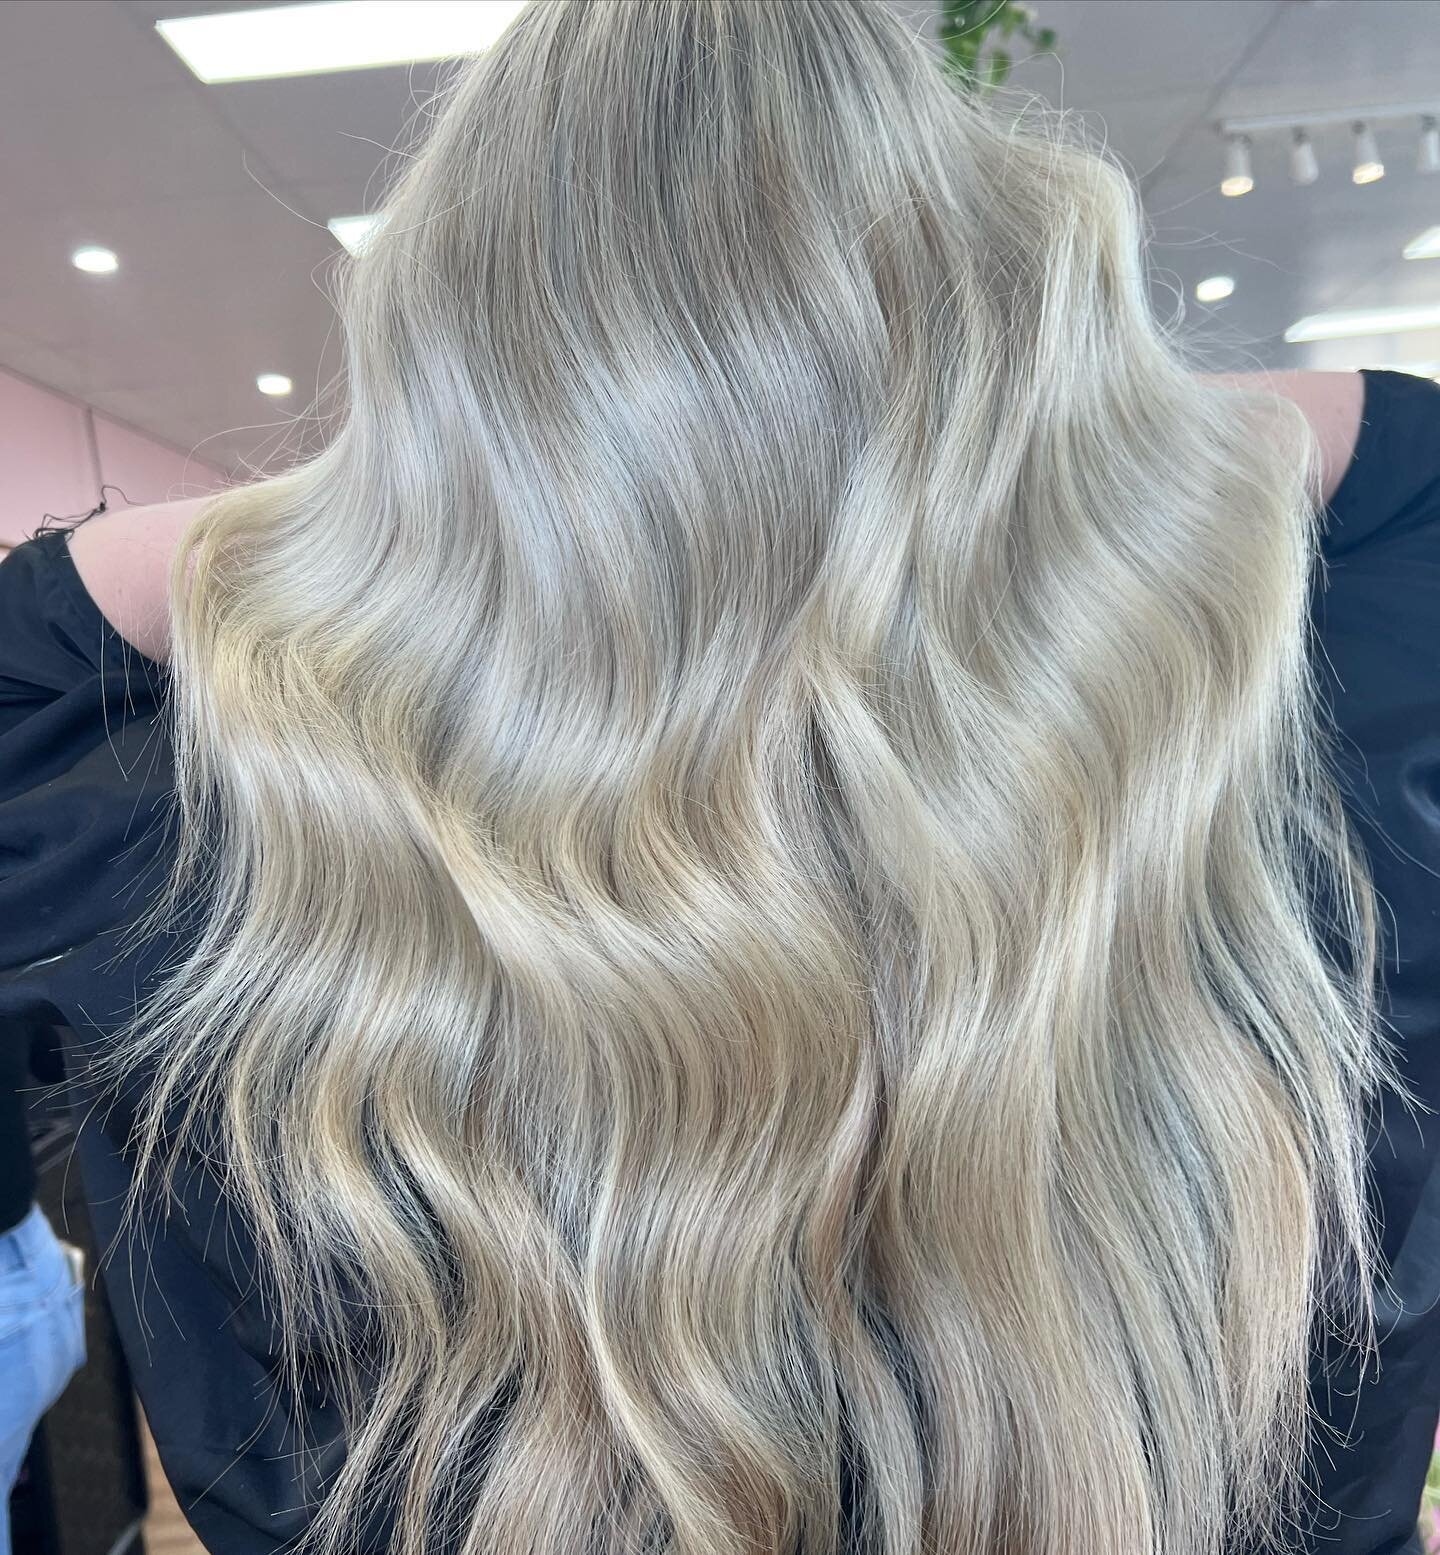 Blonde hues 💭

Wedding hair preparation to get our guest to the blonde of her dreams 🤍🦋